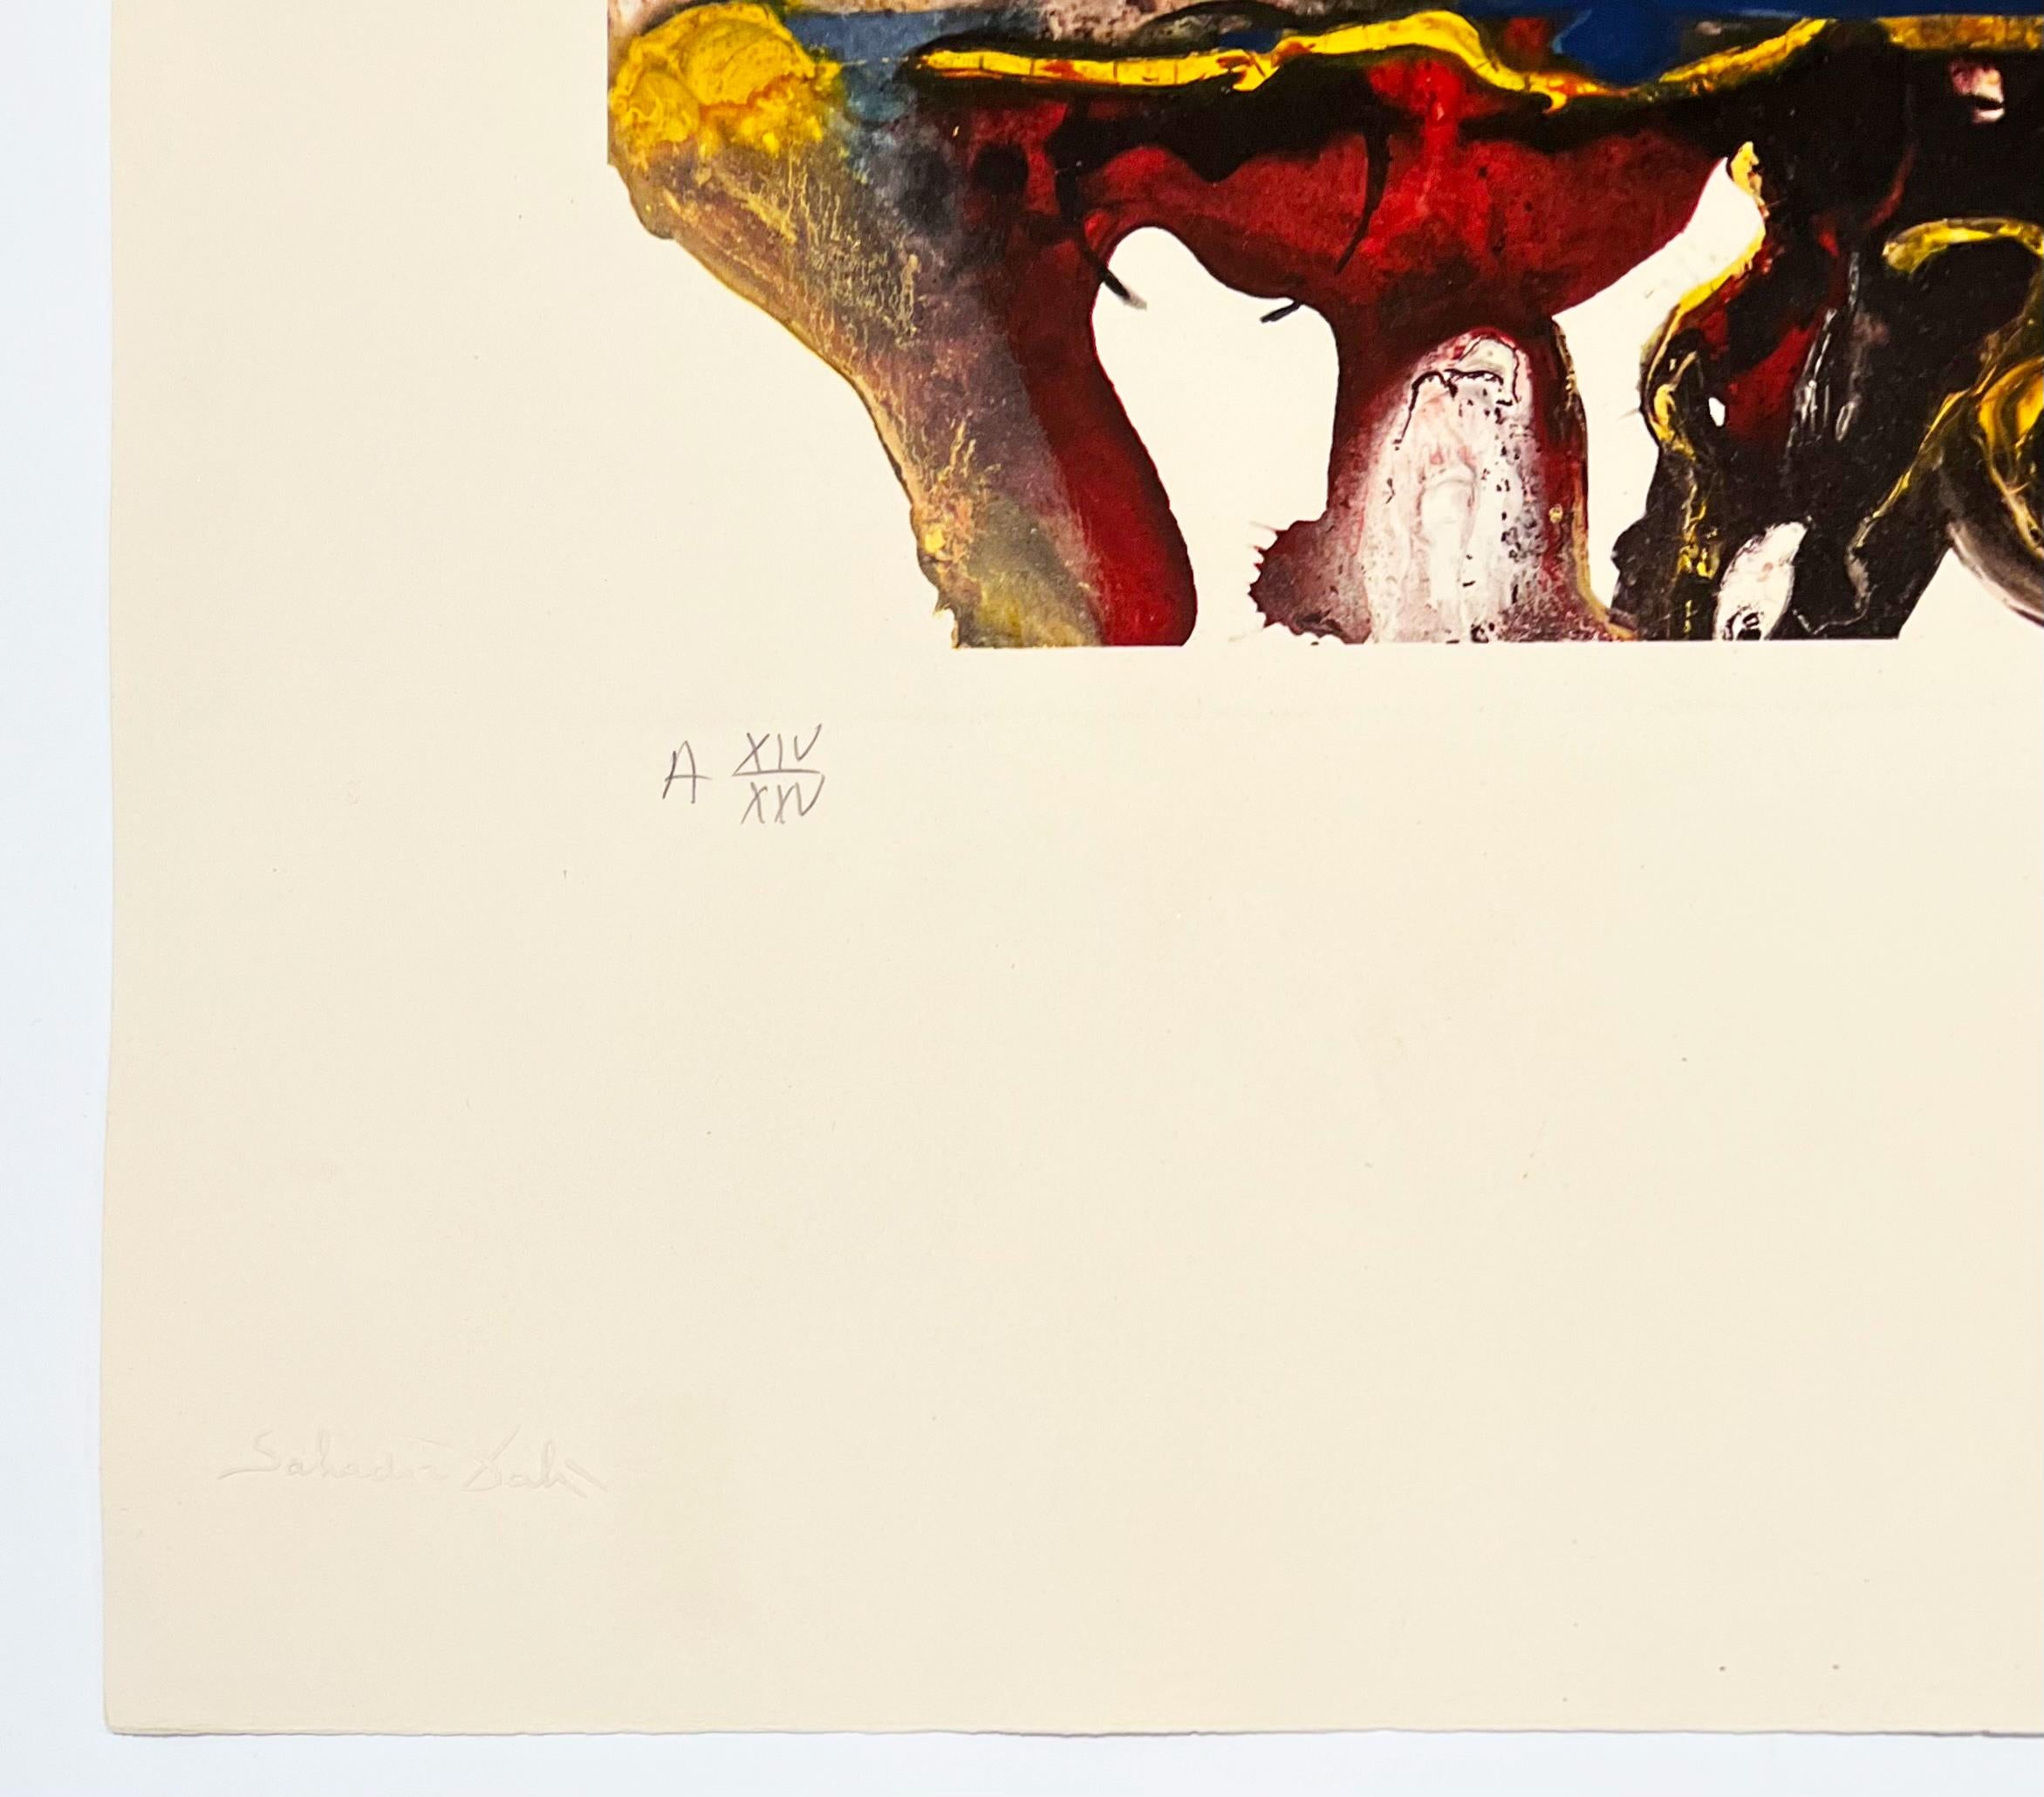 Artist: Salvador Dali
Title: Surrealist Gastronomy
Portfolio: Memories of Surrealism
Medium: Etching and photolithograph
Date: 1971
Edition: AP XIV/XXV (artist's proof 14/25, aside from the edition of 175)
Sheet Size: 29 3/4